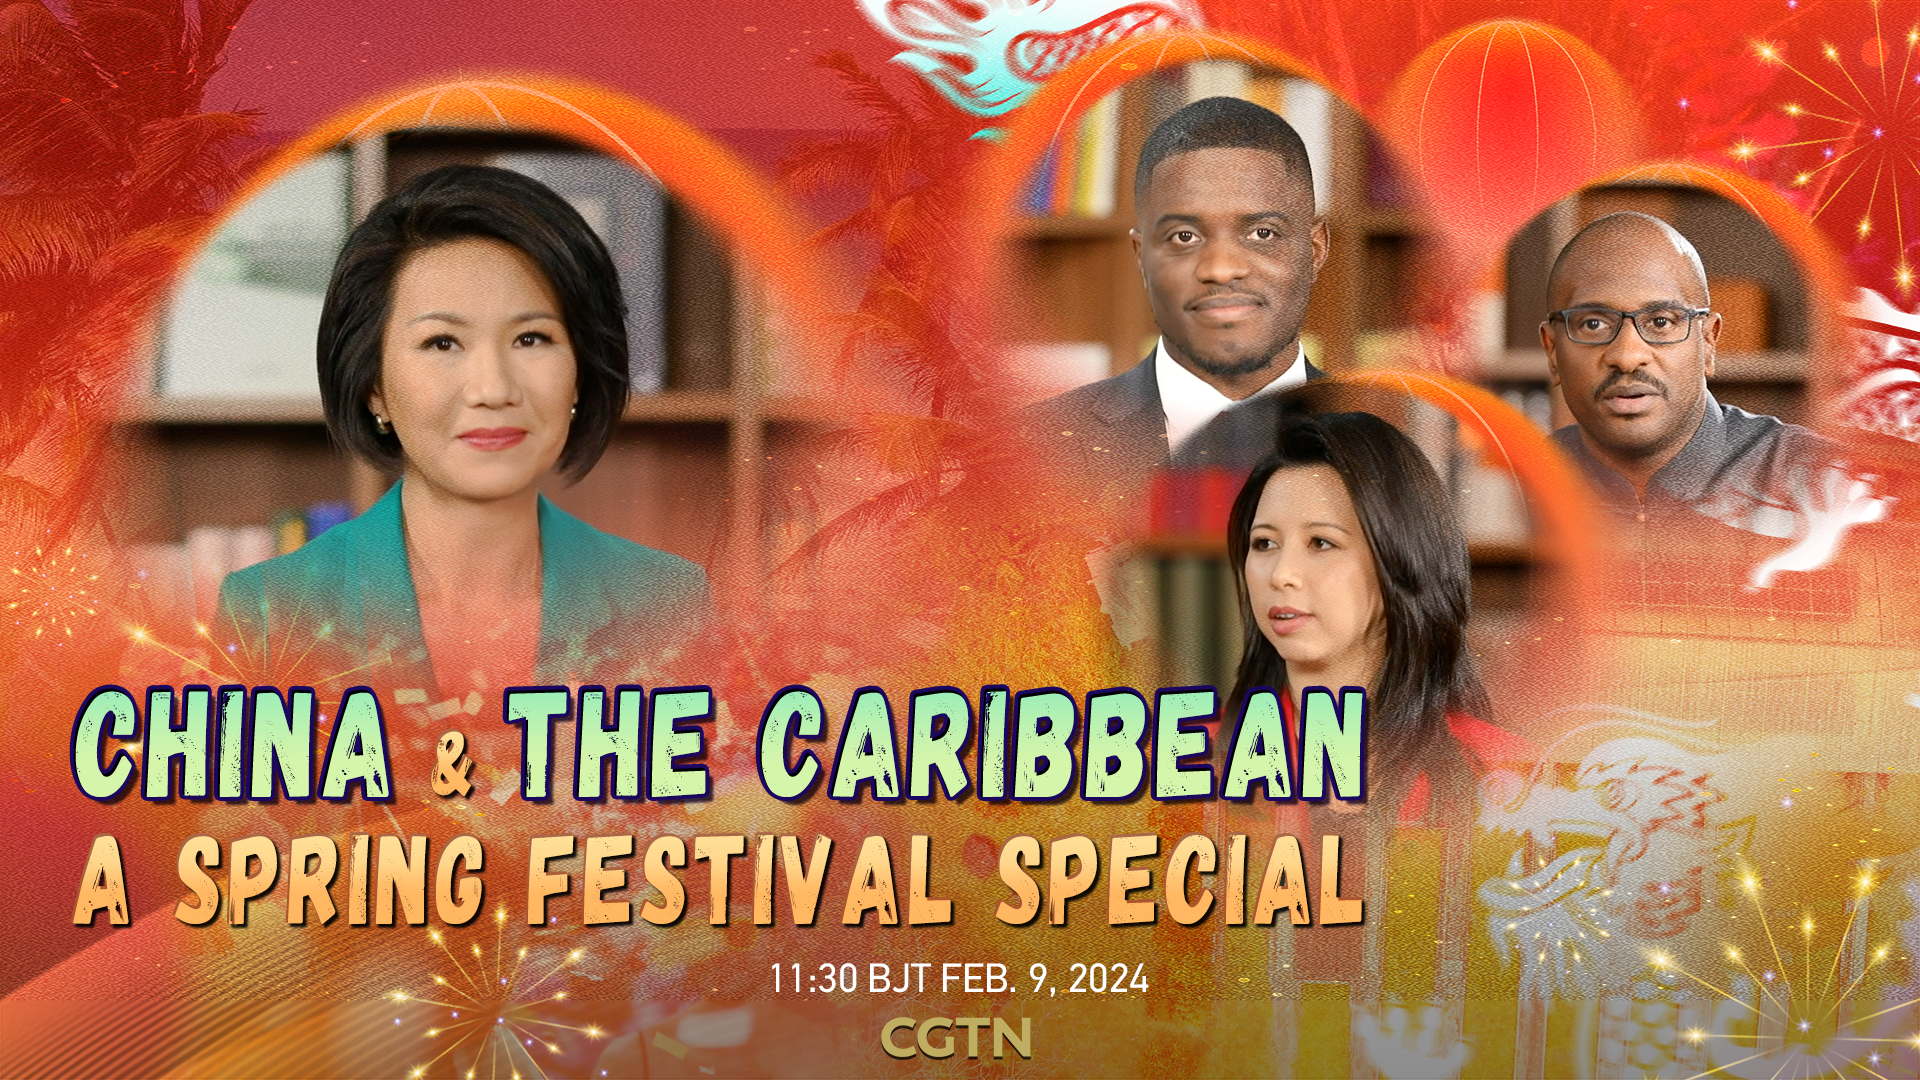 Watch: A Spring Festival special – Chinese New Year with a Caribbean flavor